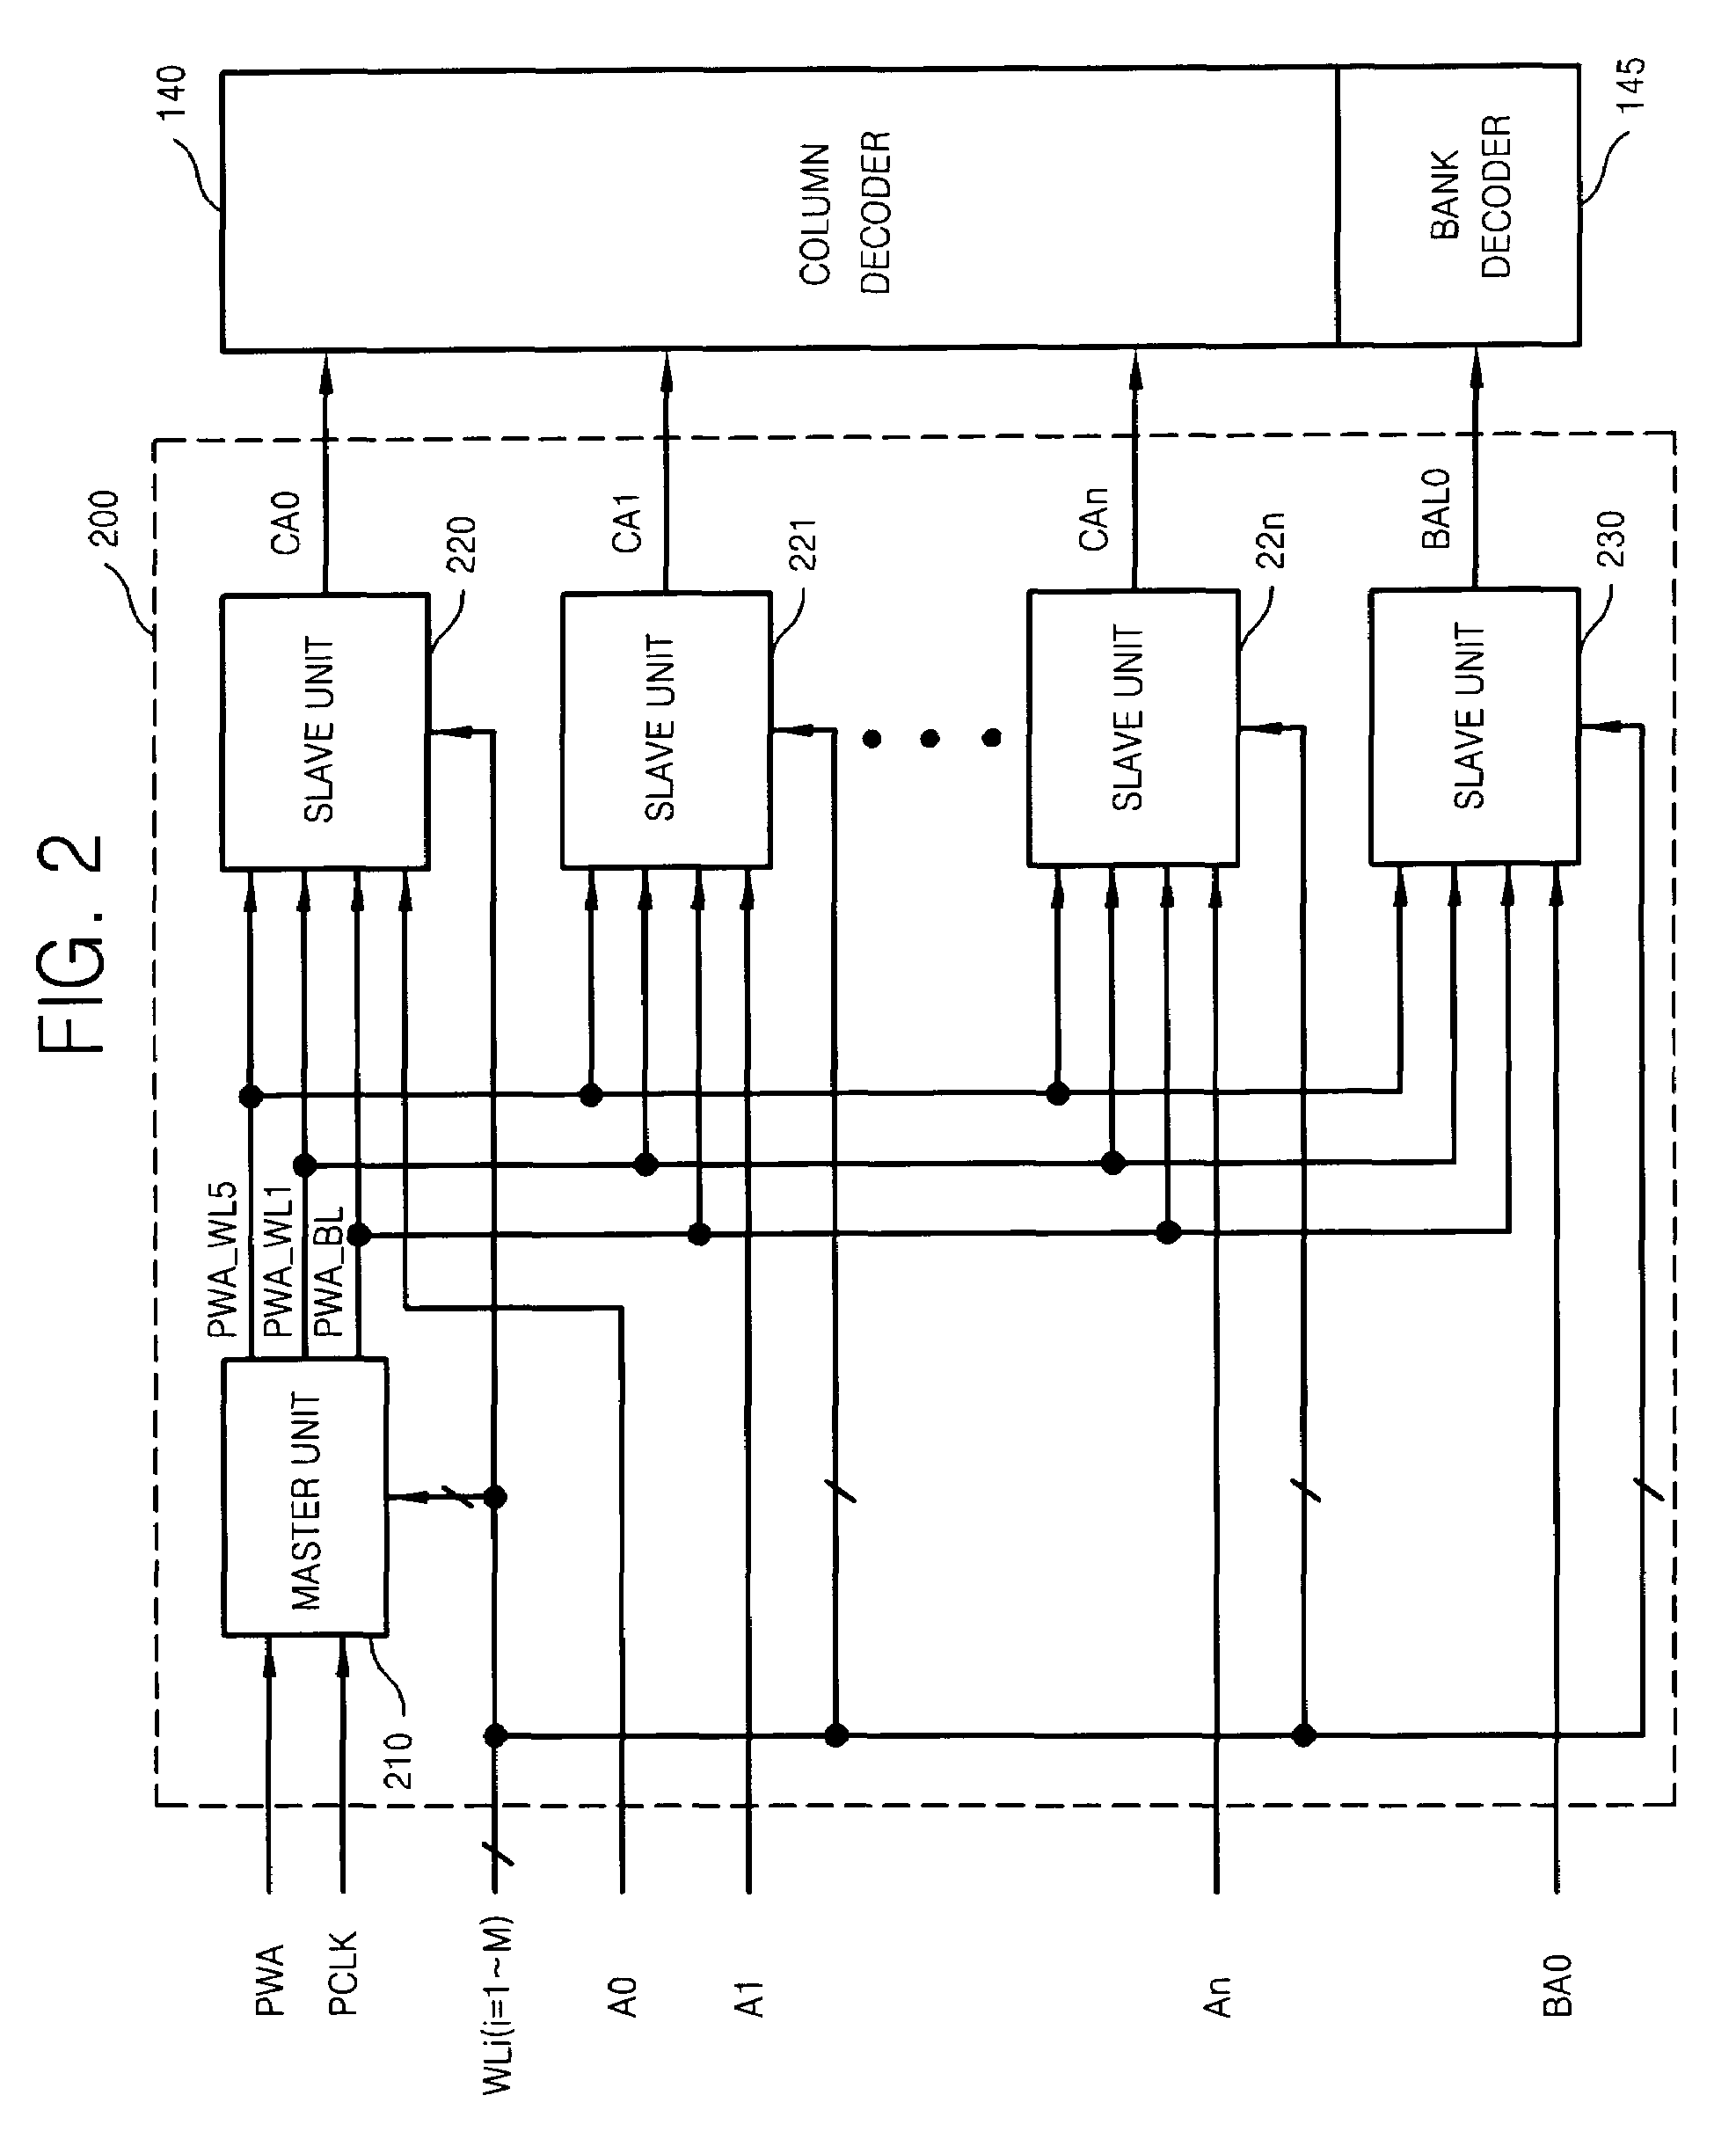 Latency control circuit and method thereof and an auto-precharge control circuit and method thereof